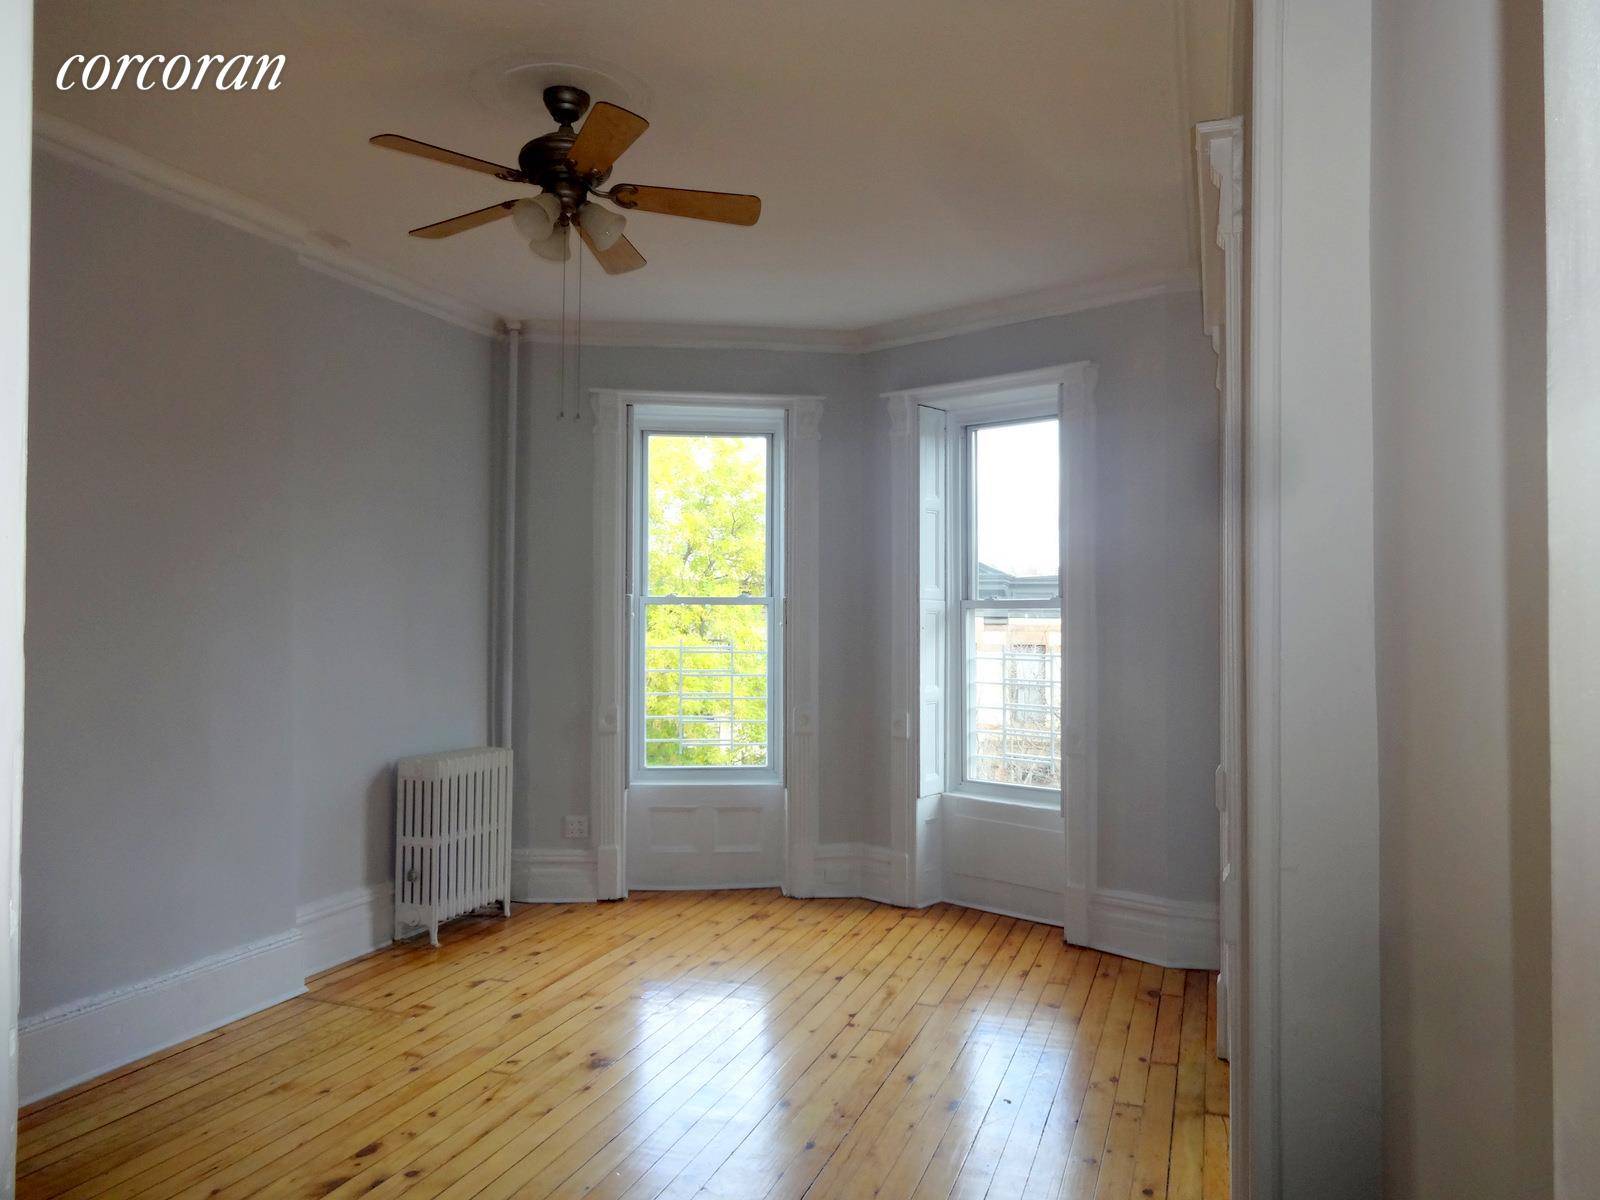 Fully renovated 3 bedroom home in a beautiful brownstone on a tree lined street !